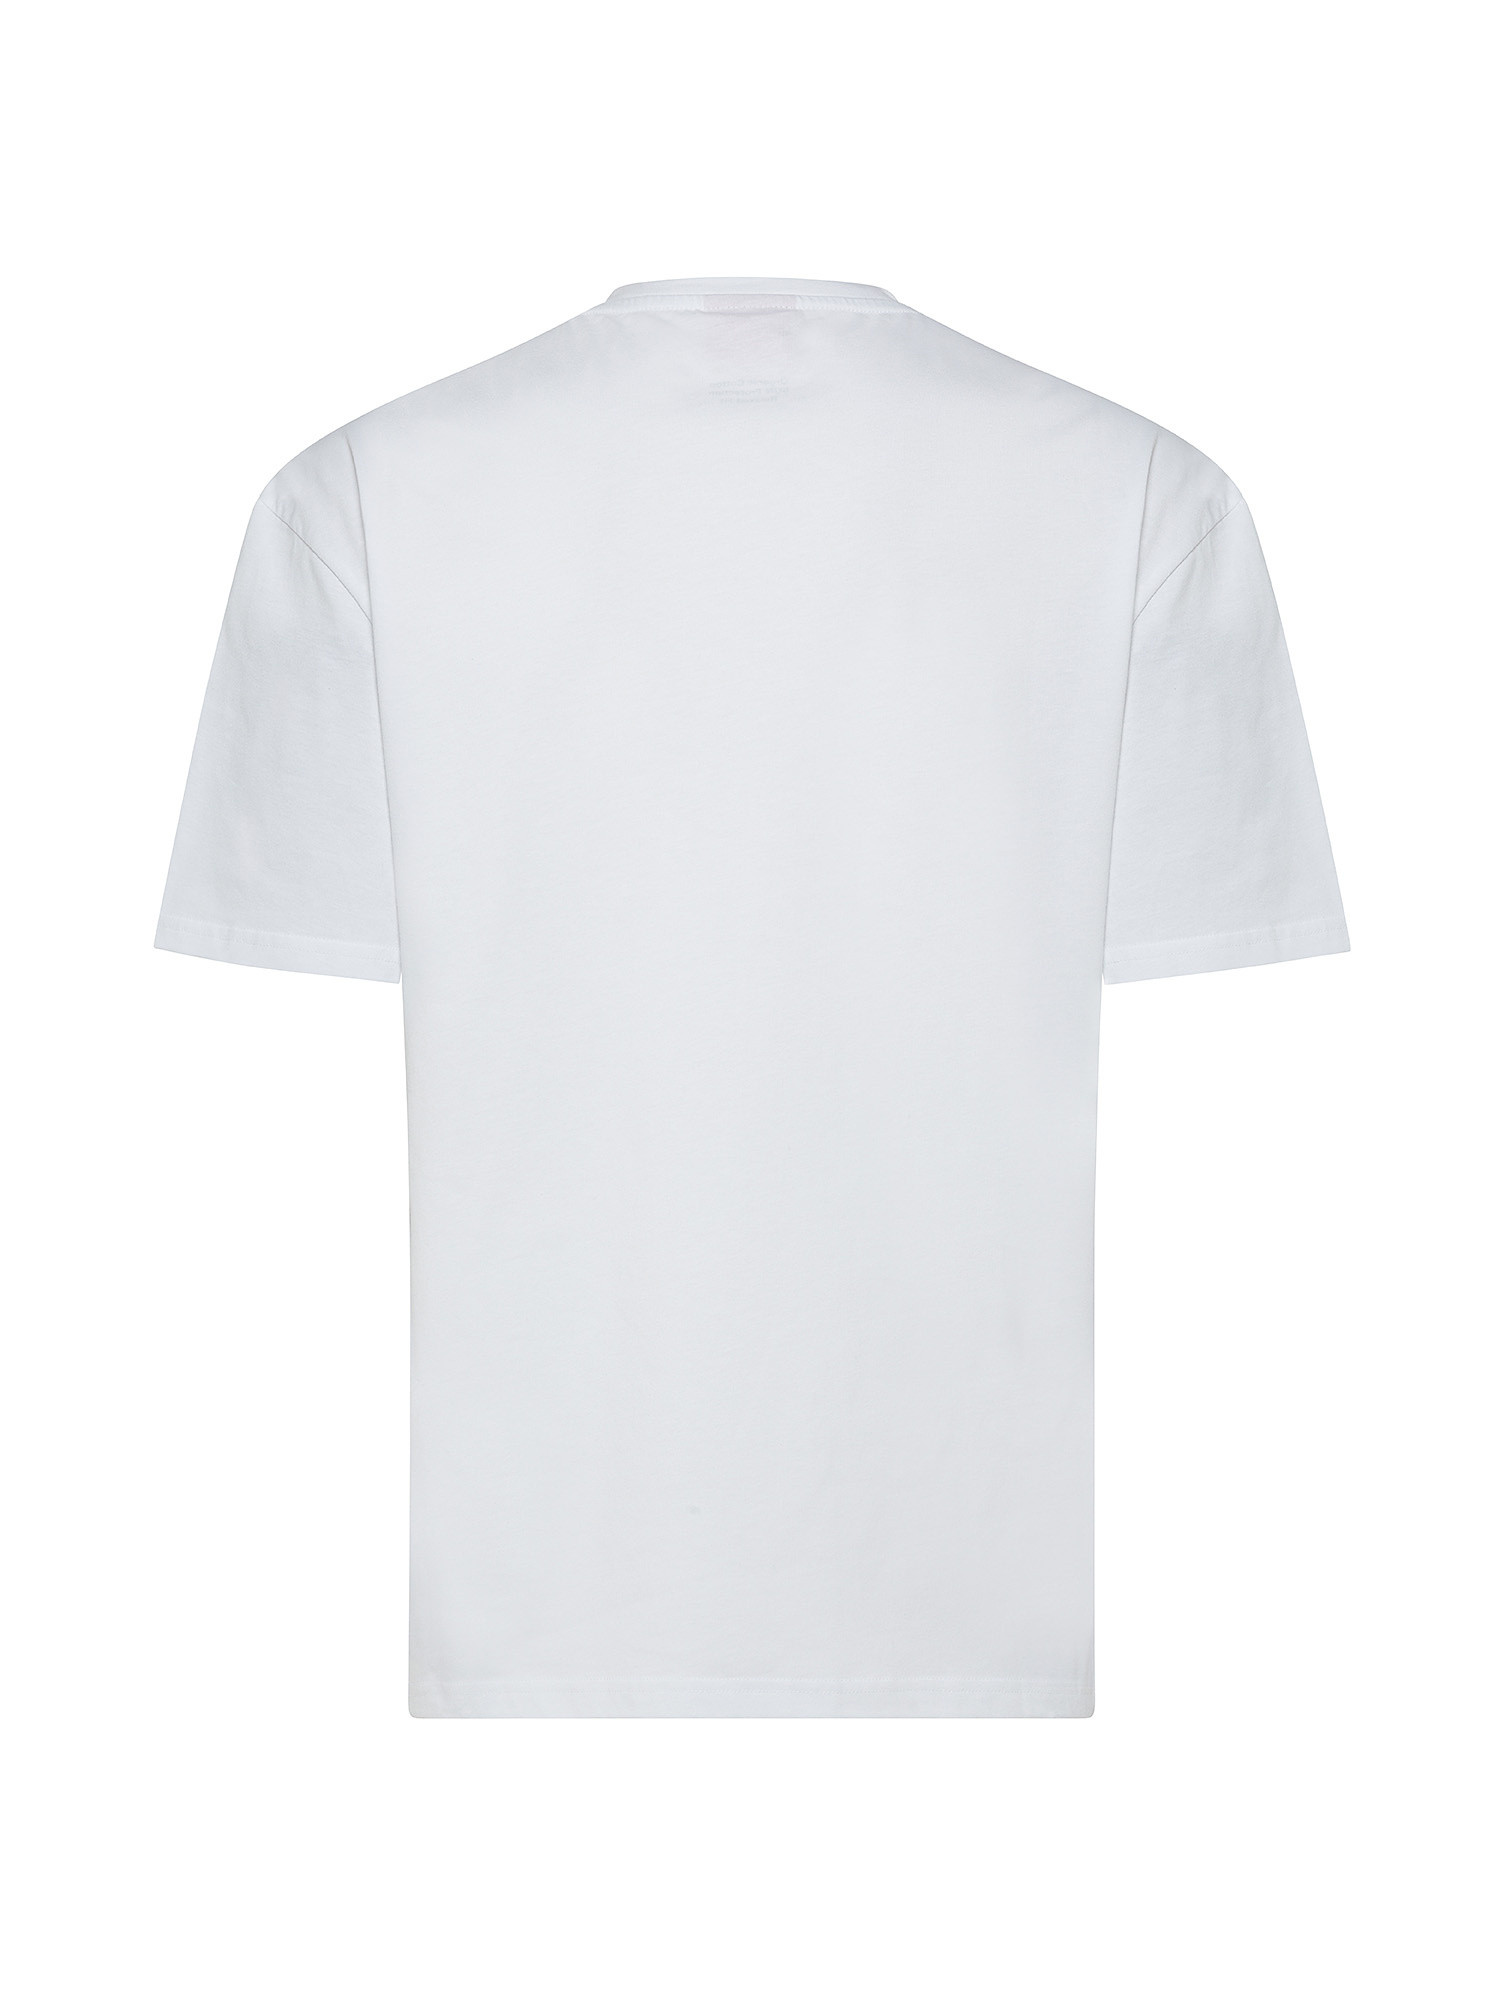 Hugo - T-shirt with logo print in cotton, White, large image number 1